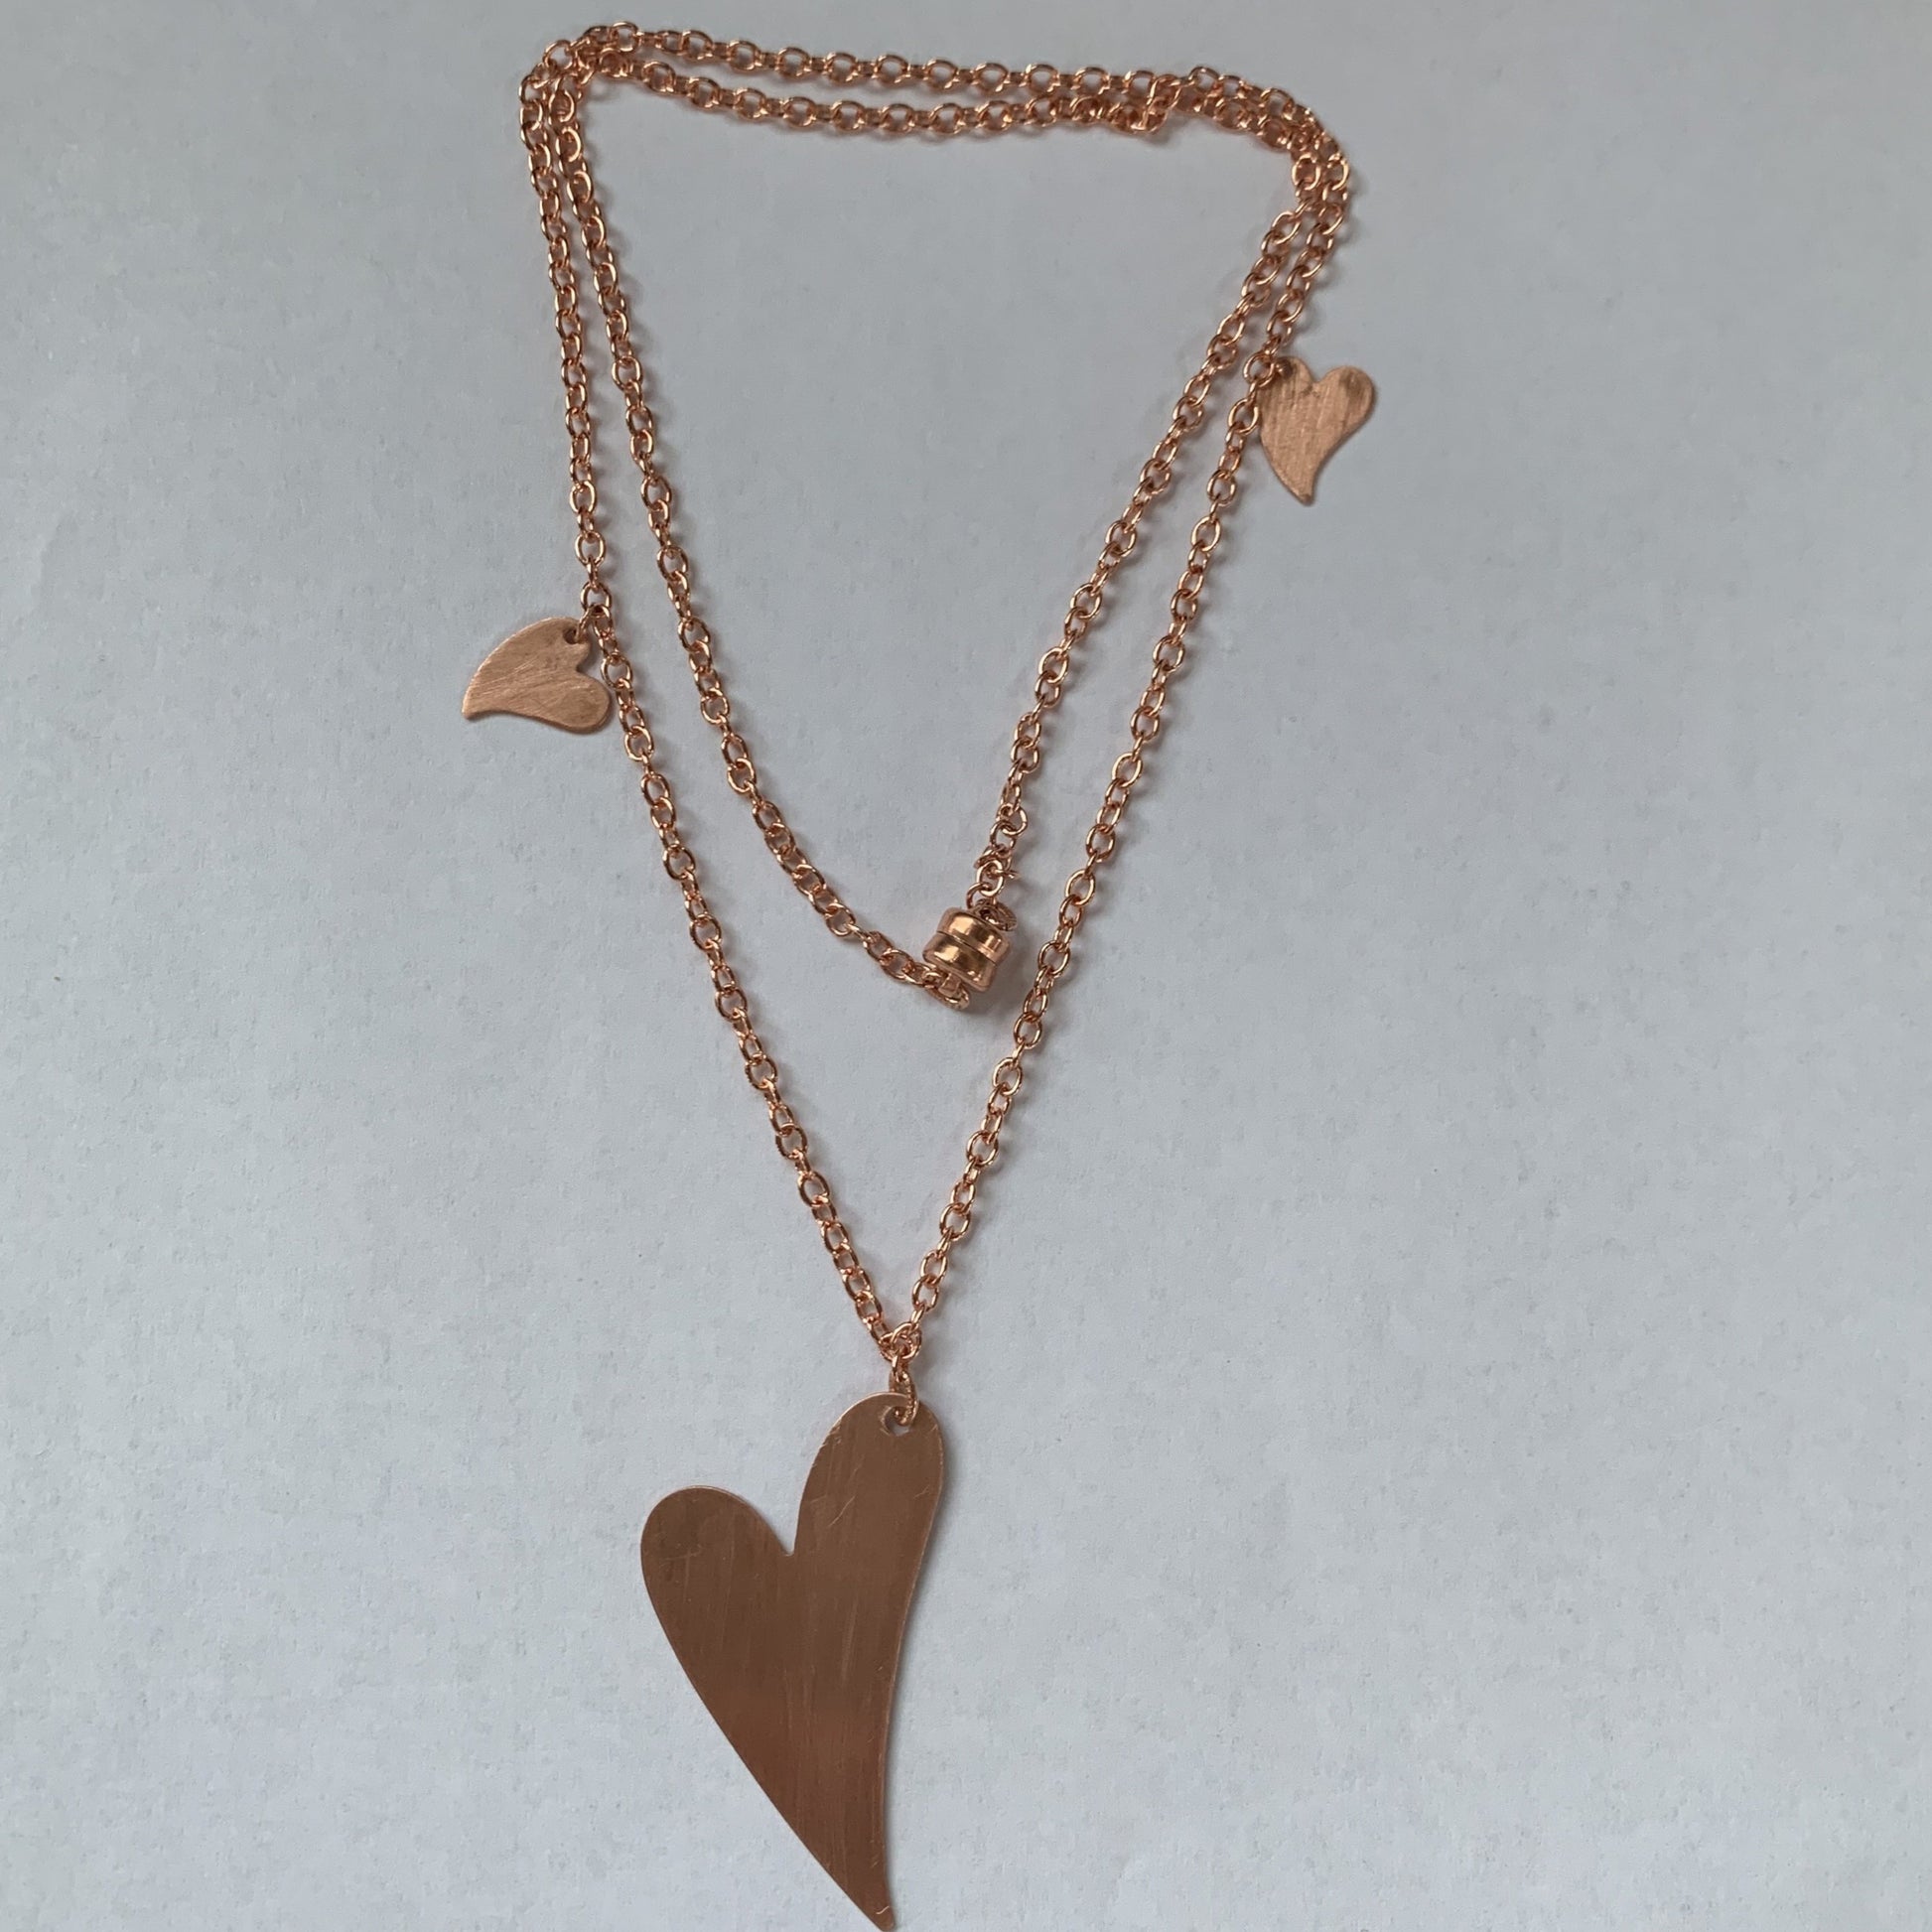 Copper hearts on copper chain with copper magnet